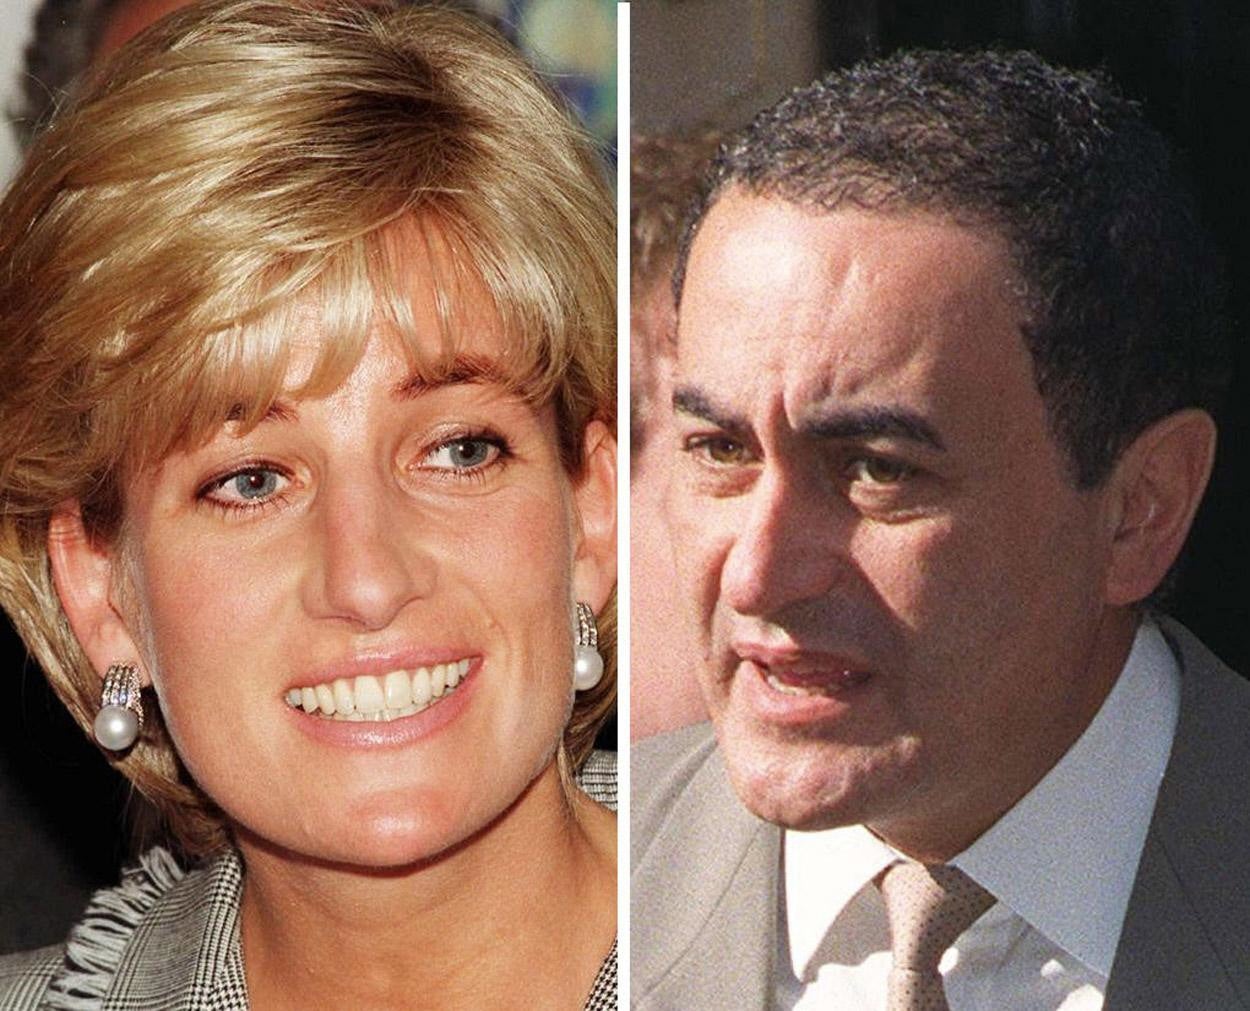 Reports about Cujo dominated the media in August 1997, when it was owned by Diana’s boyfriend, Dodi Al-Fayed